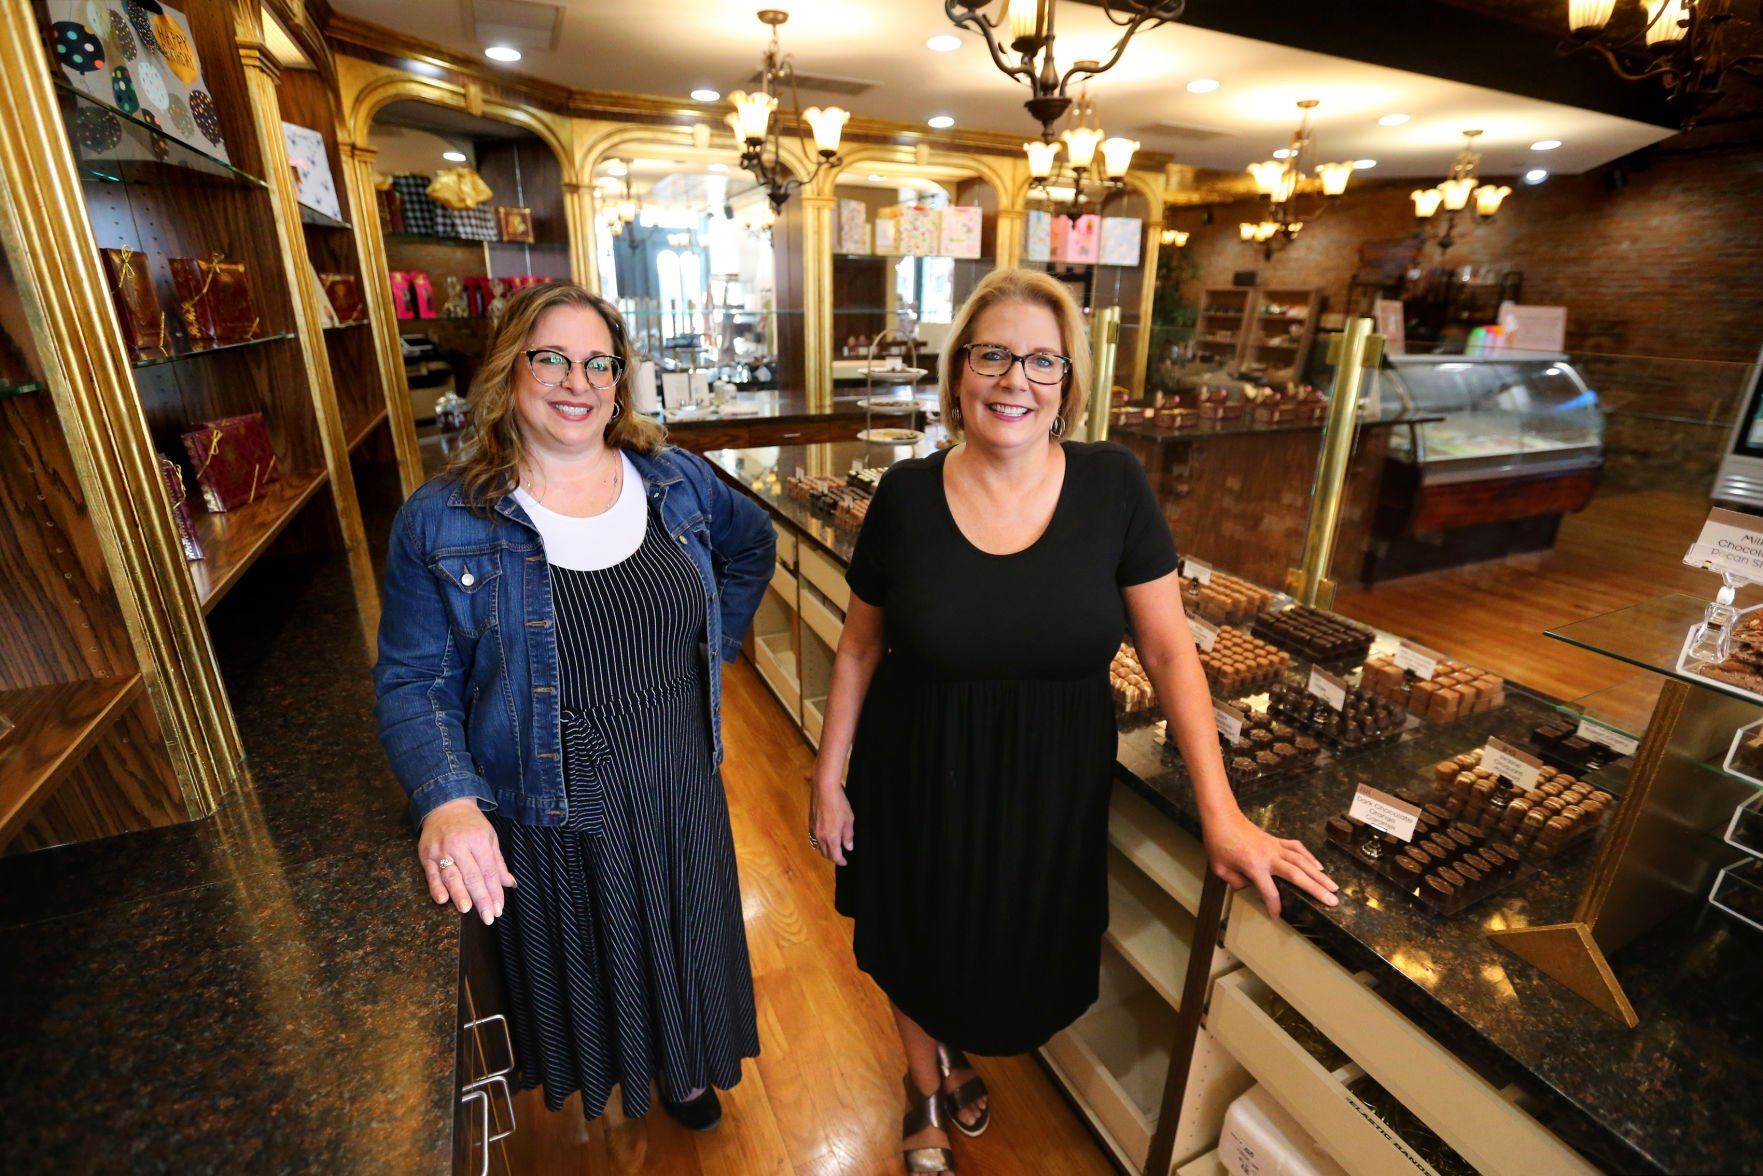 Owner Jennifer McCoy (left) and manager Sharon Coleman at The Sorpresa Gifts at 269 Main St. in Dubuque.    PHOTO CREDIT: JESSICA REILLY